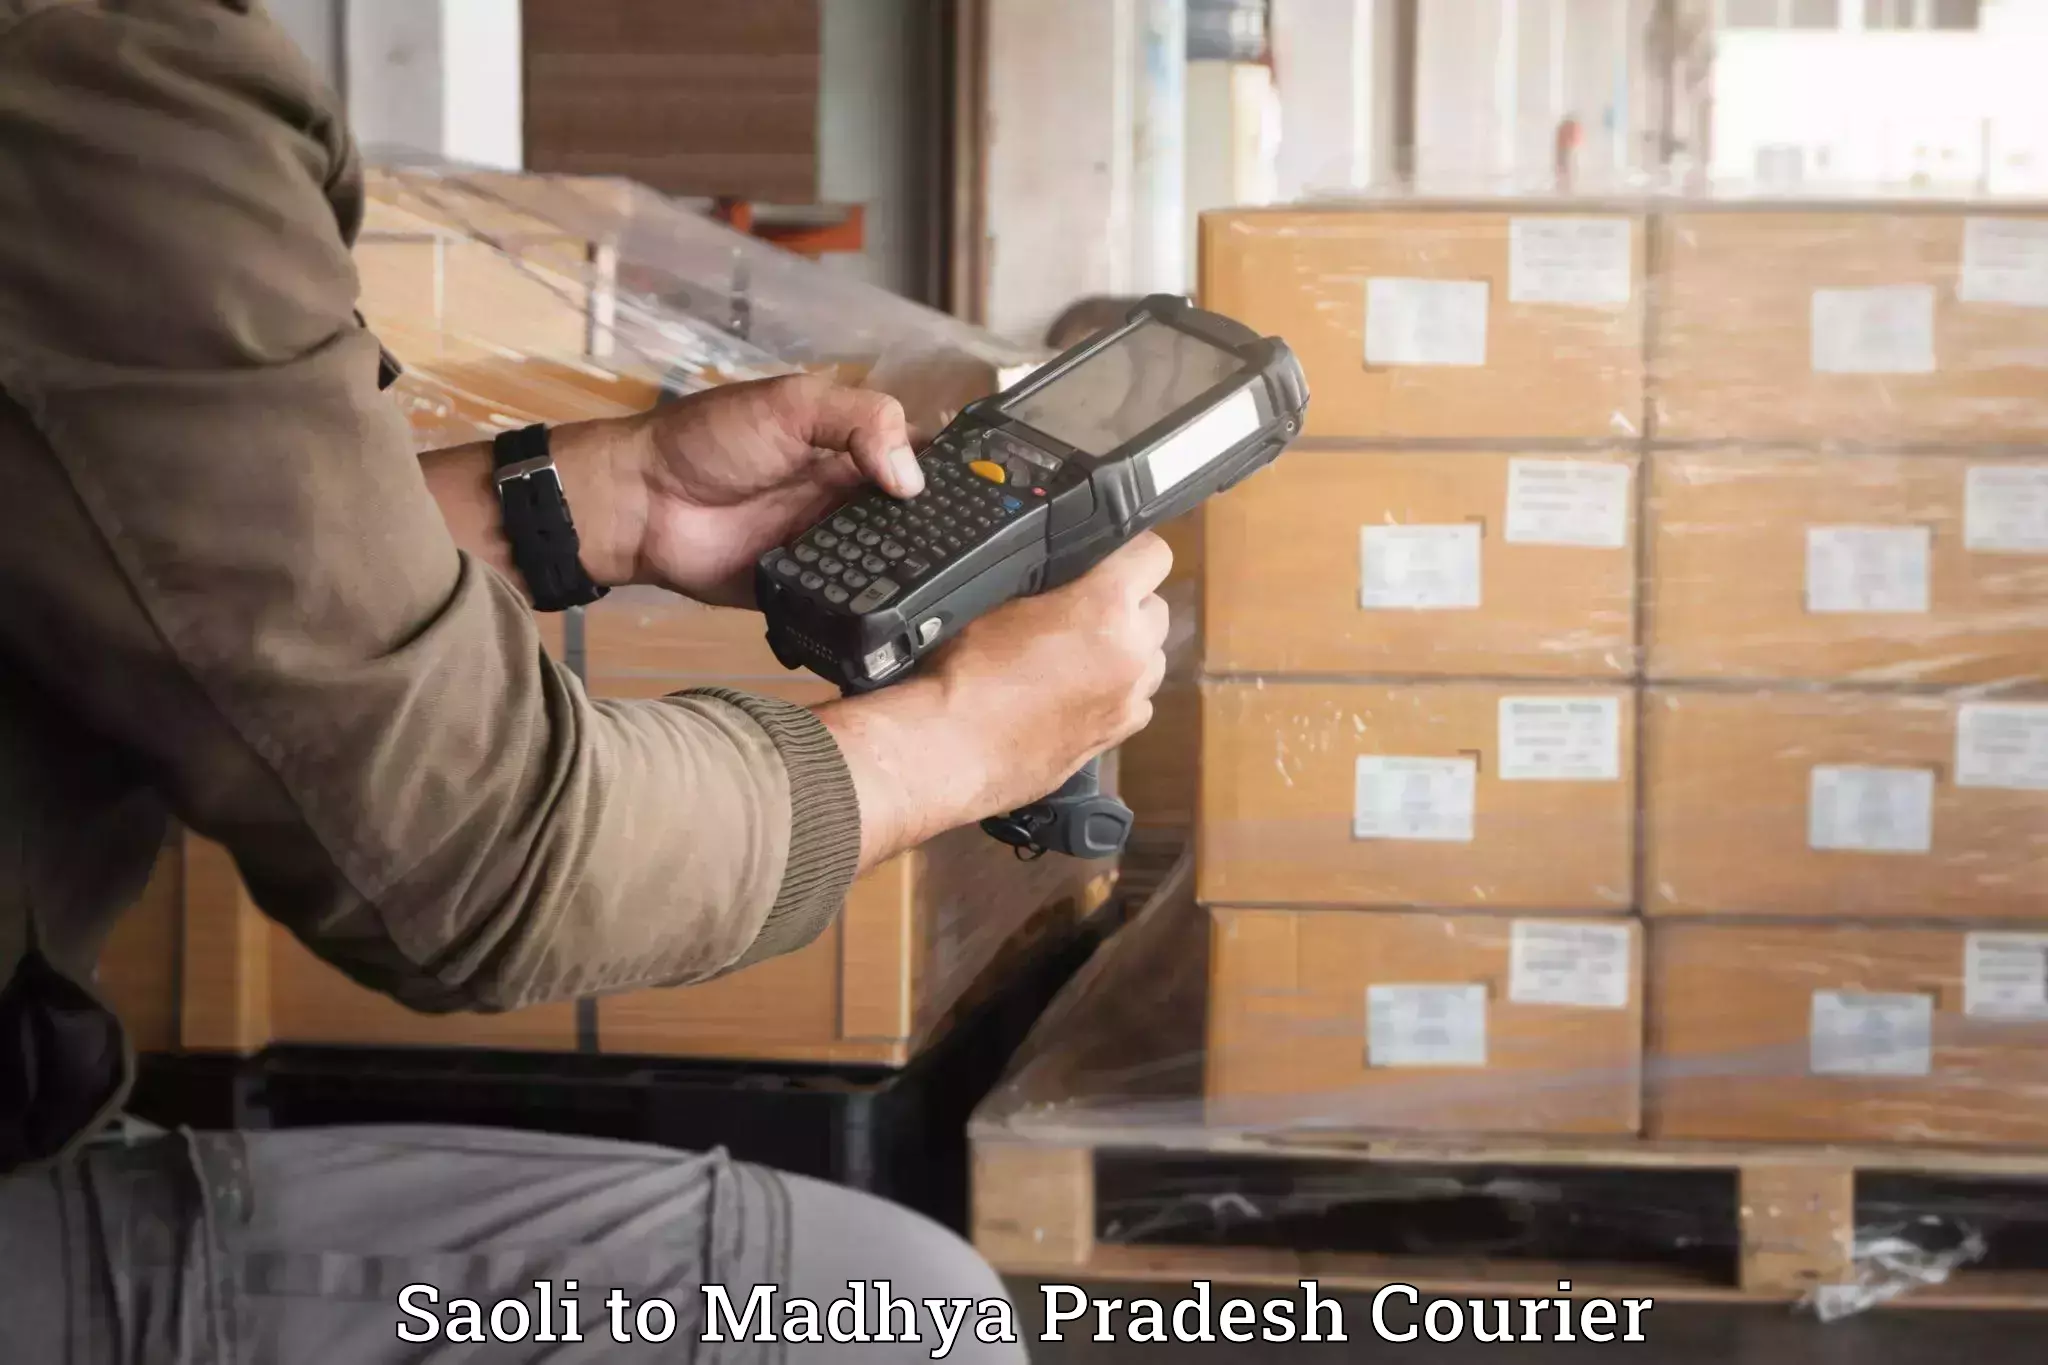 Luggage delivery network Saoli to Indore